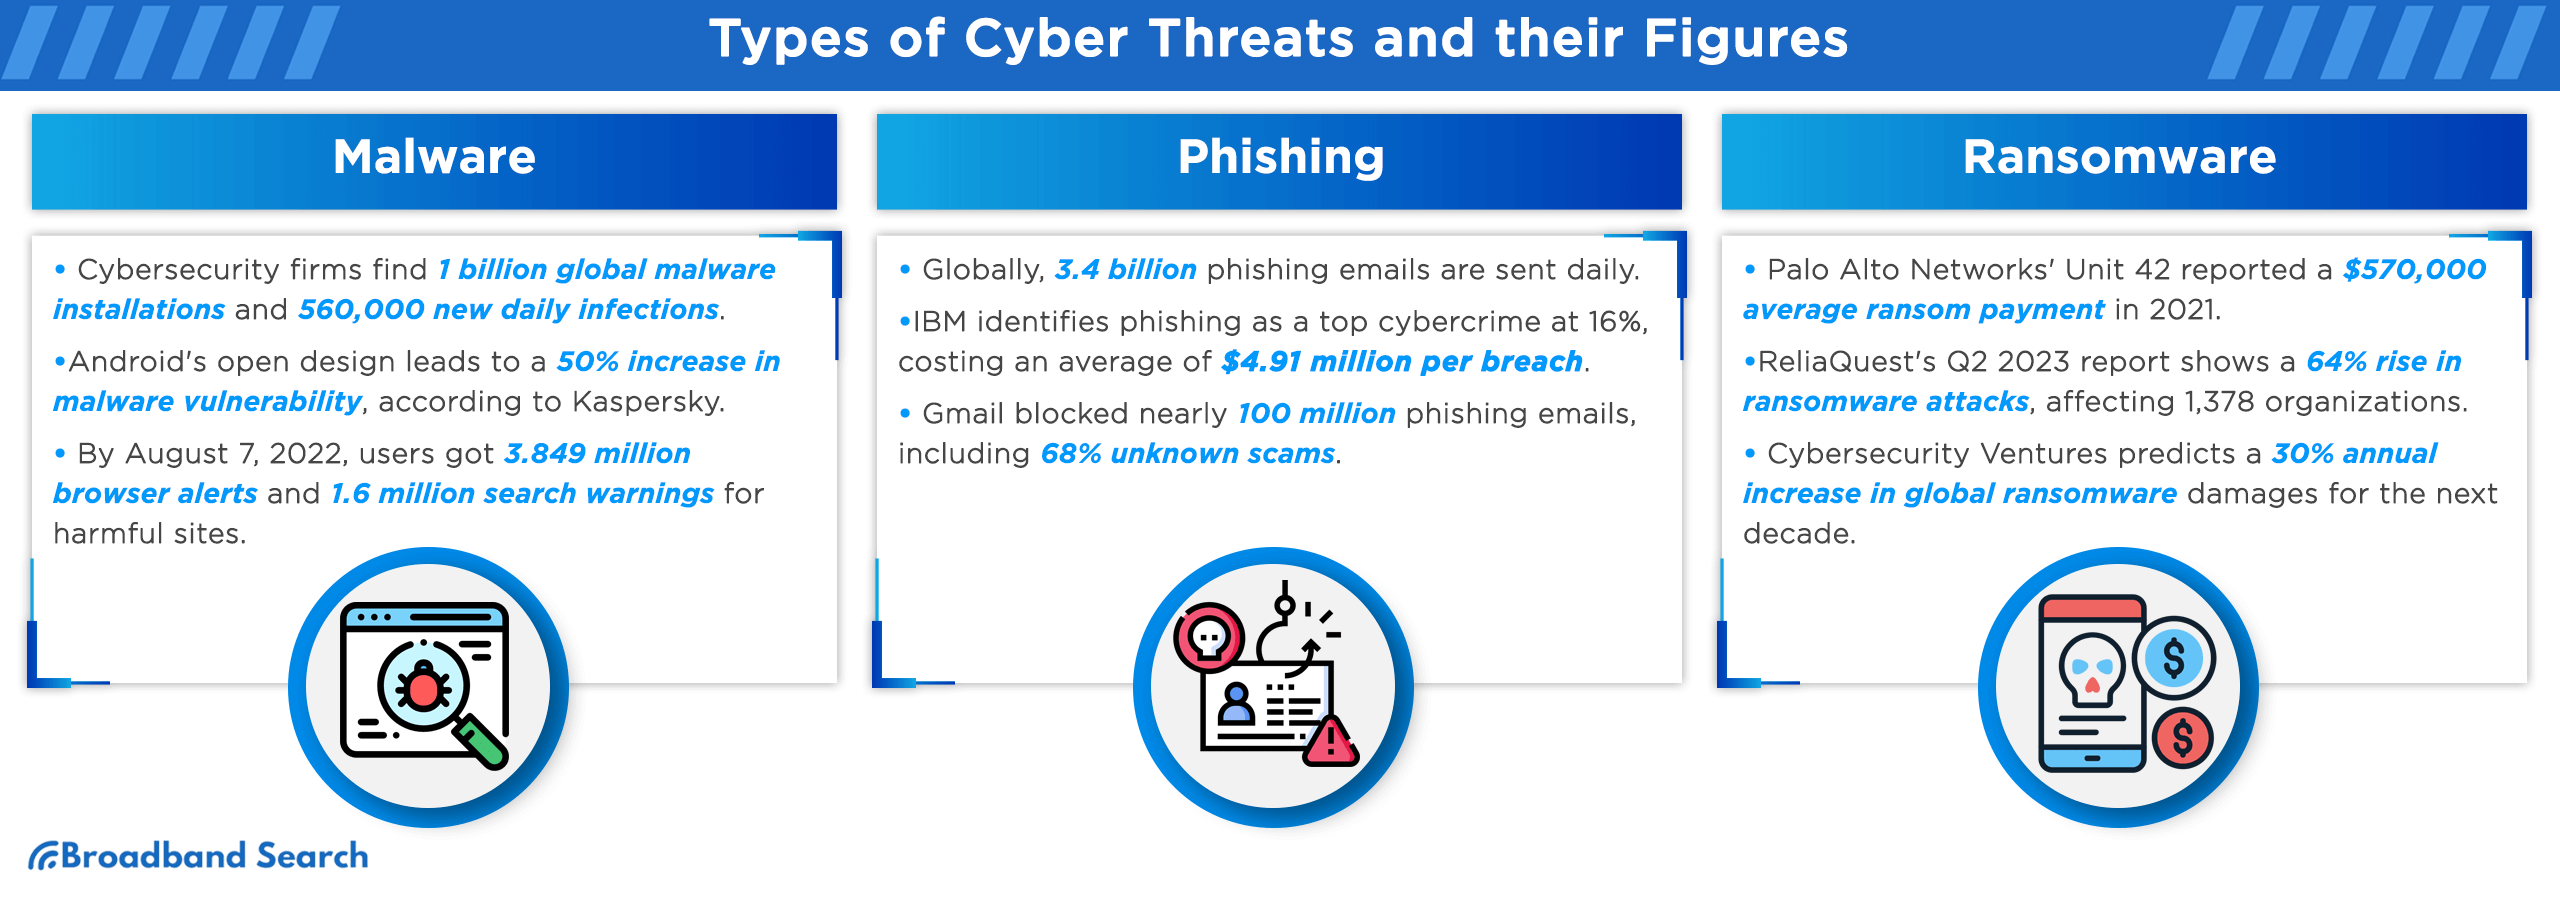 Types of Cyber threats such as Malware, Phising, and Ransomware and with statistical data on their occurence and effects